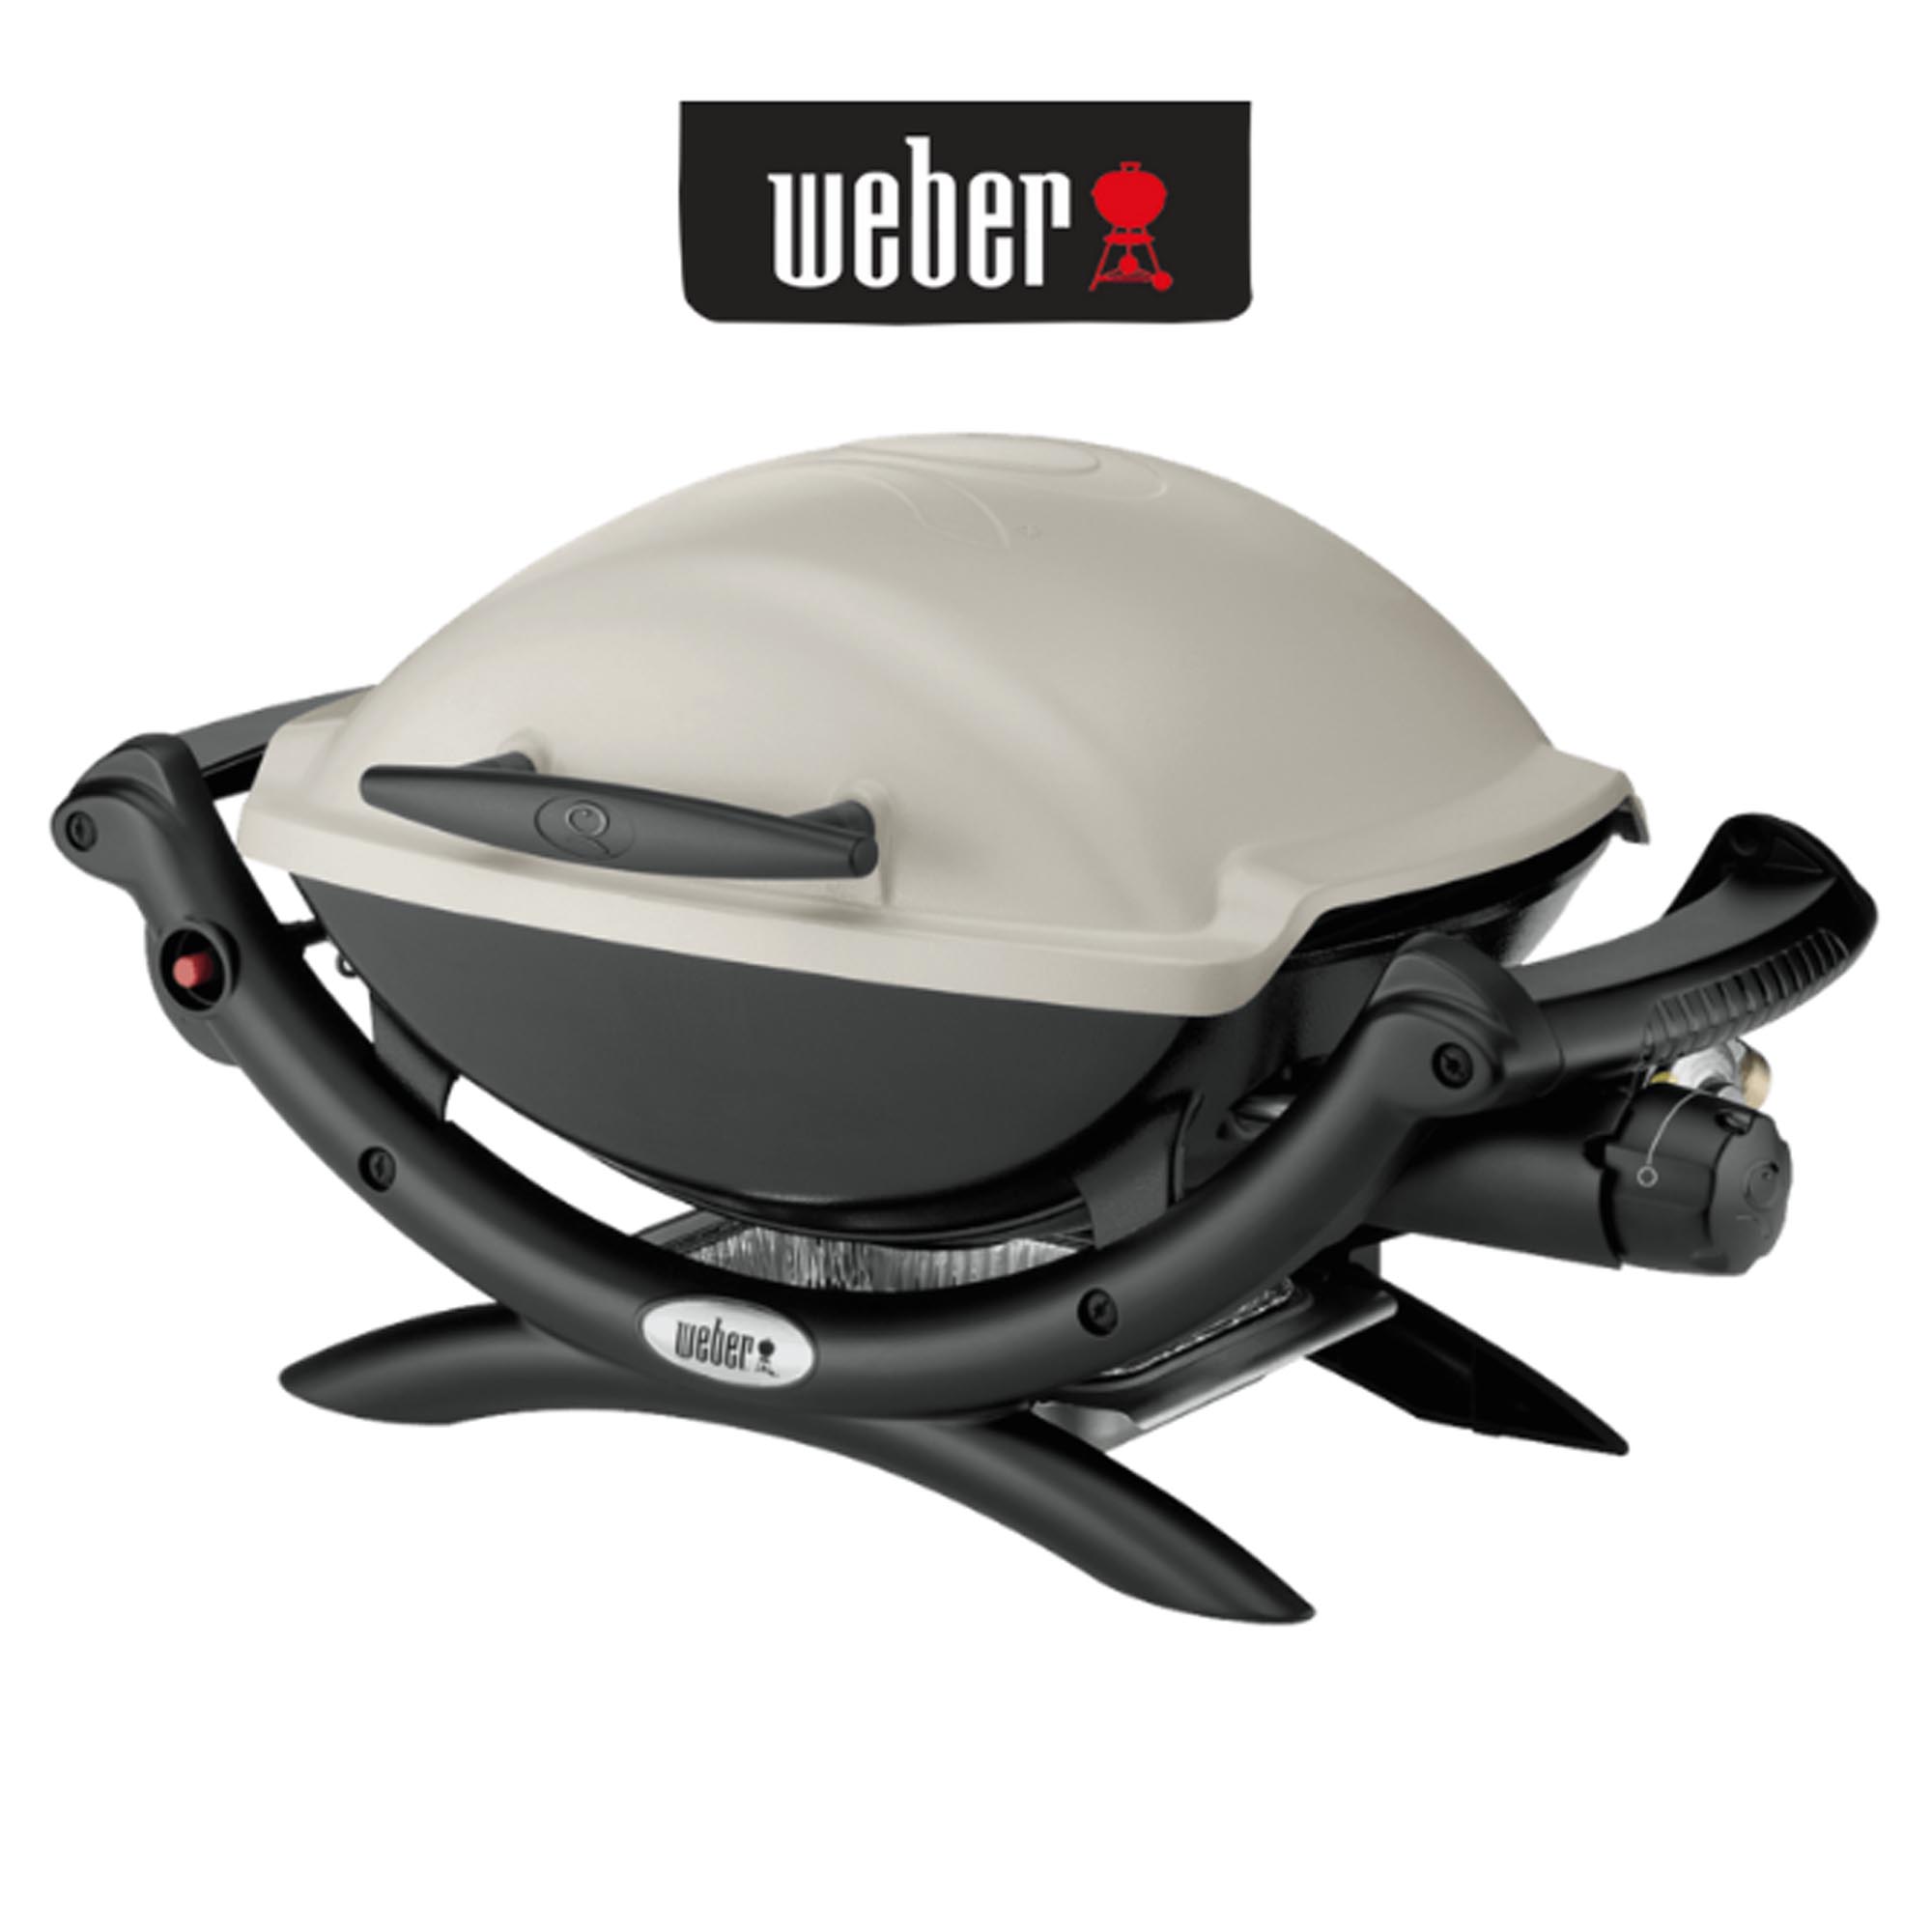 Weber 50060224 Q1000AU Baby Q Gas BBQ Barbeque LPG with lid in black and white